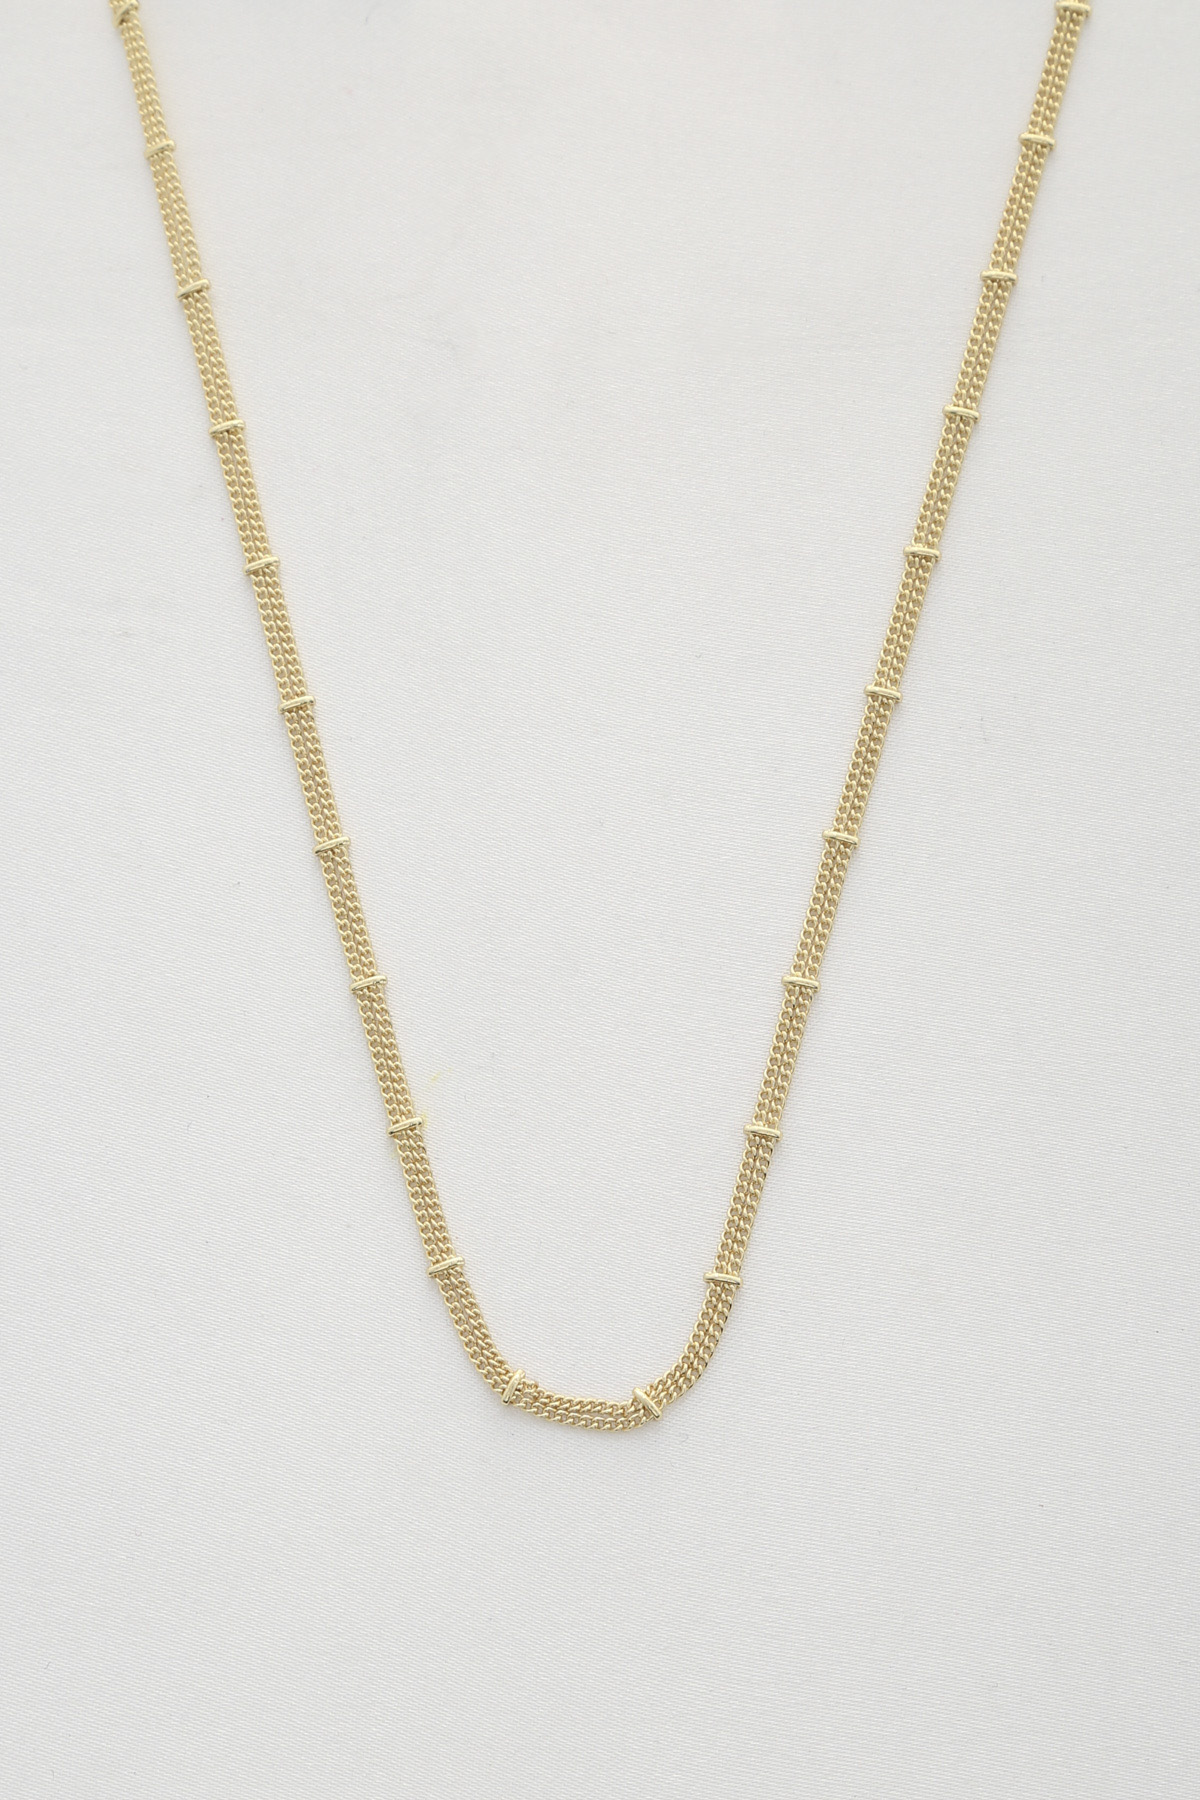 METAL 14K GOLD DIPPED NECKLACE